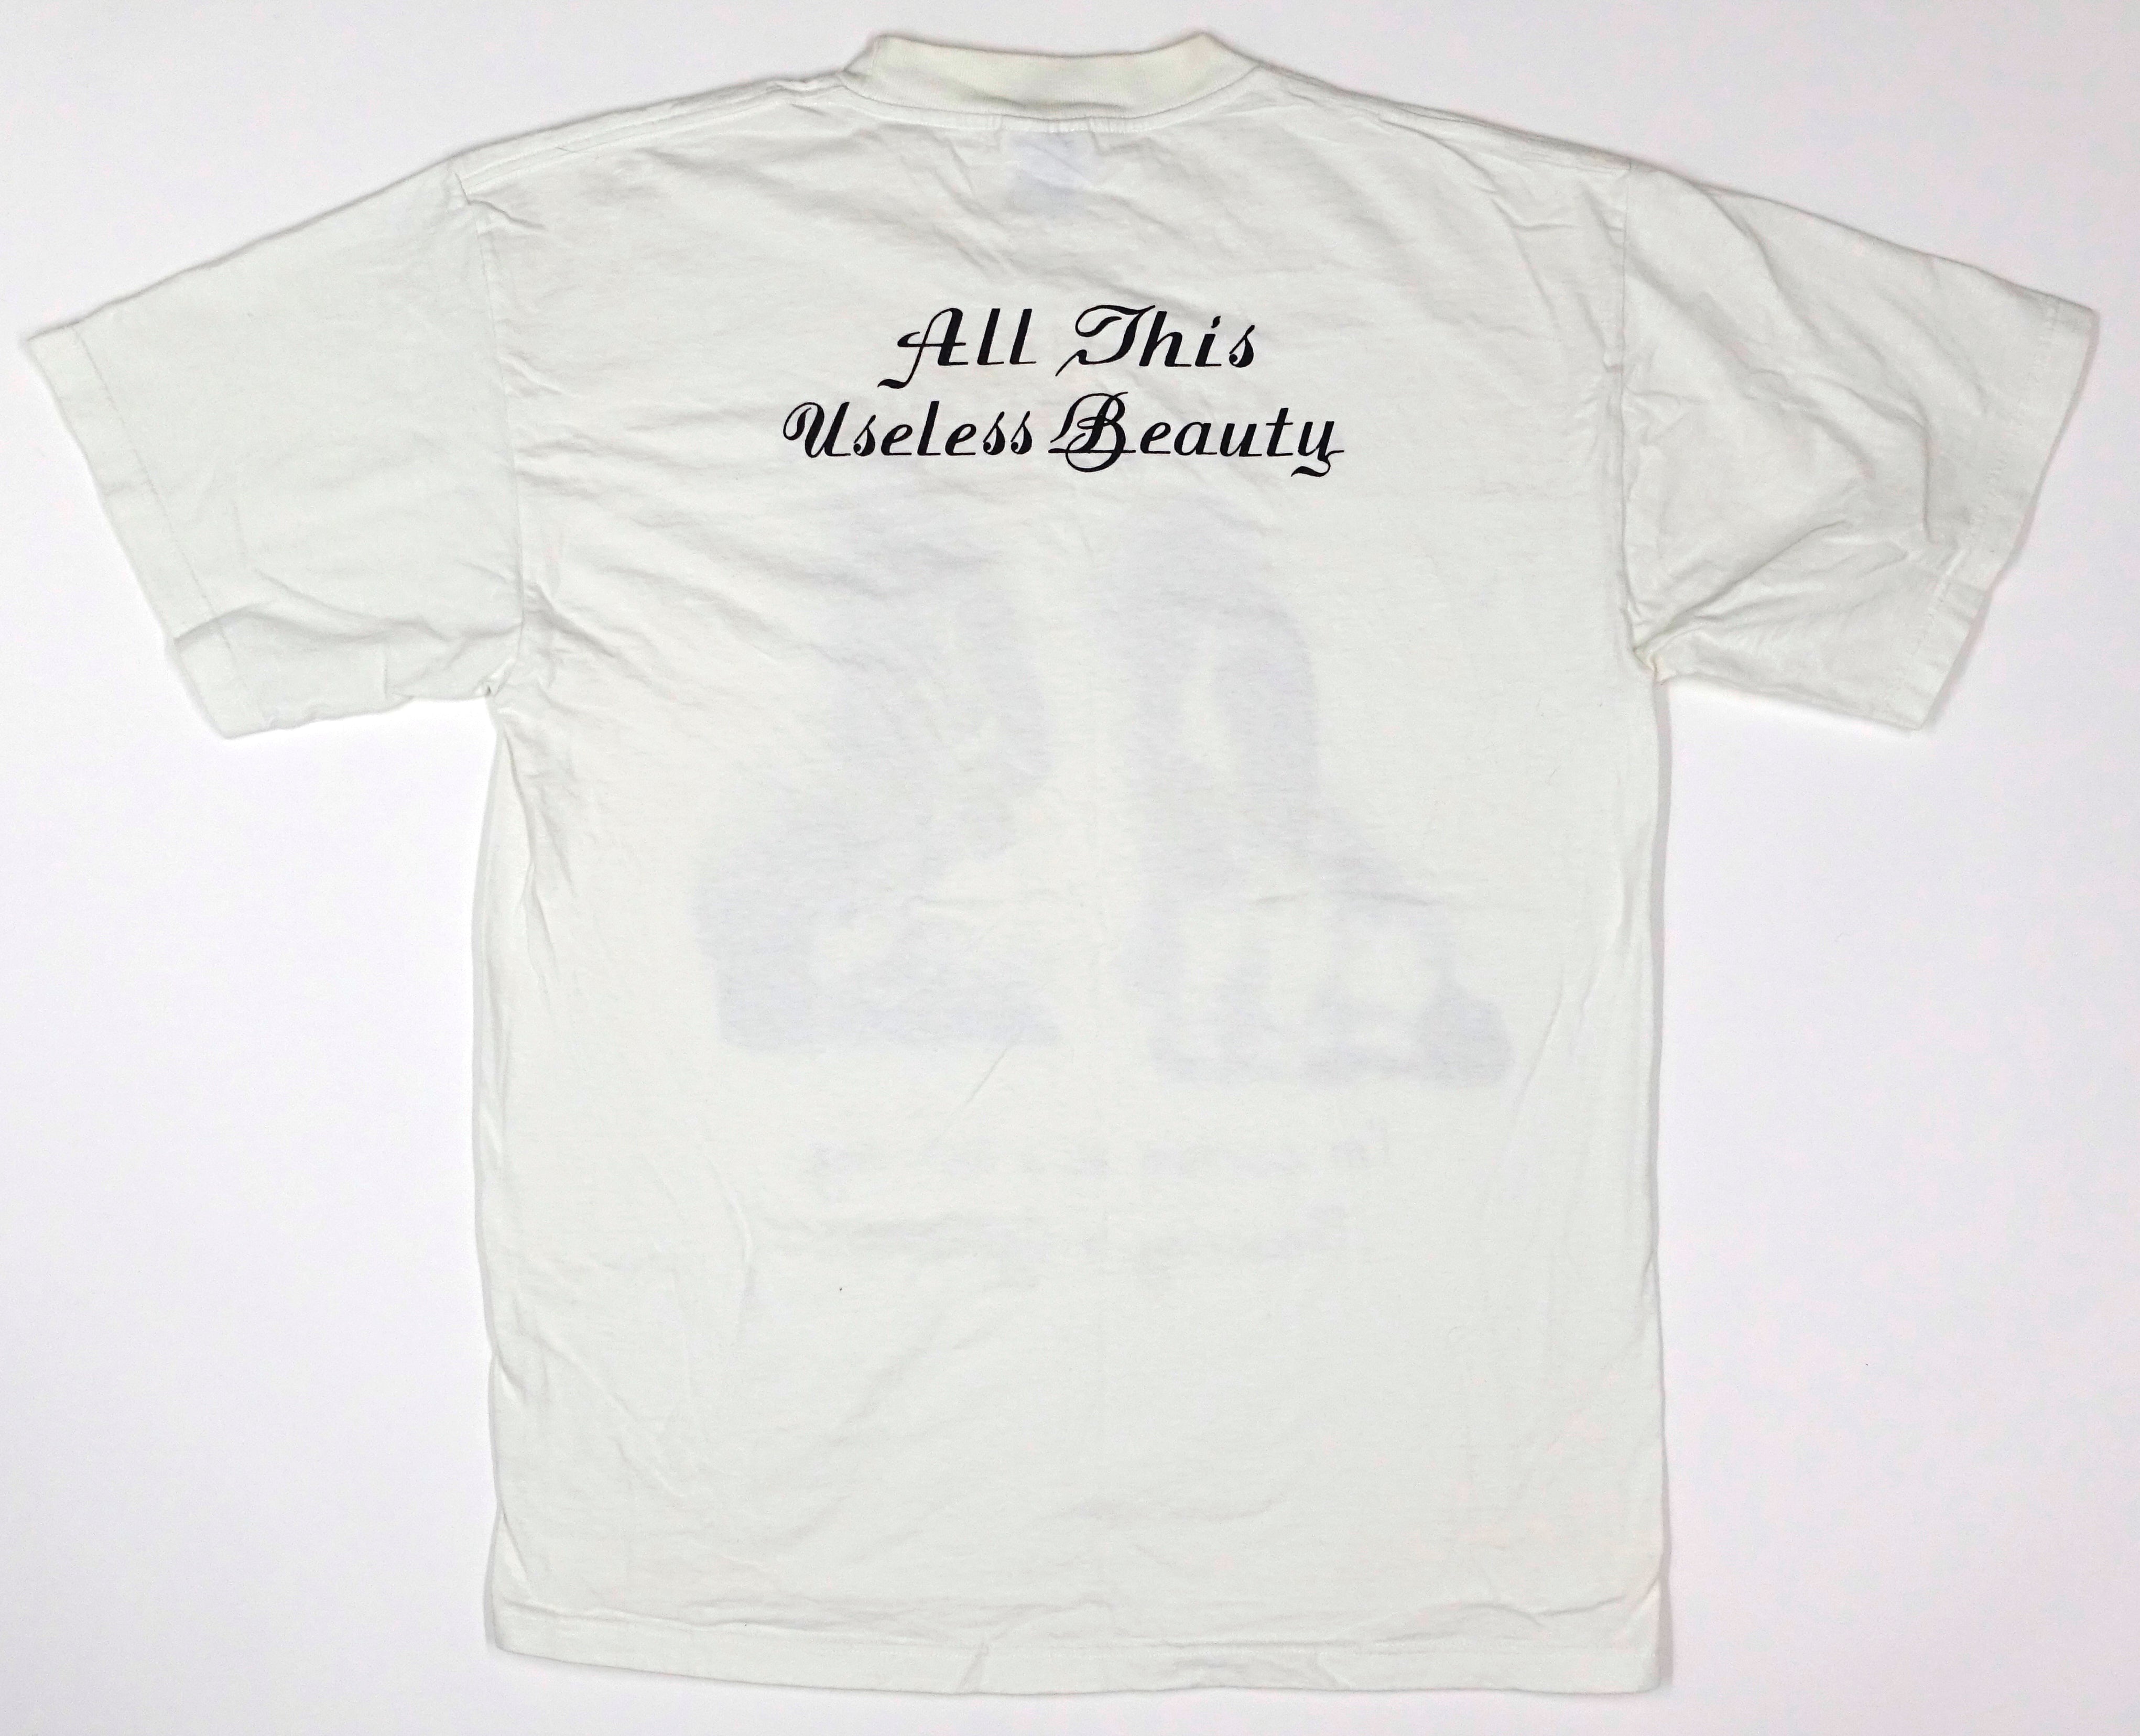 Elvis Costello & the Attractions ‎– All This Useless Beauty 1996 Tour Shirt Size Large